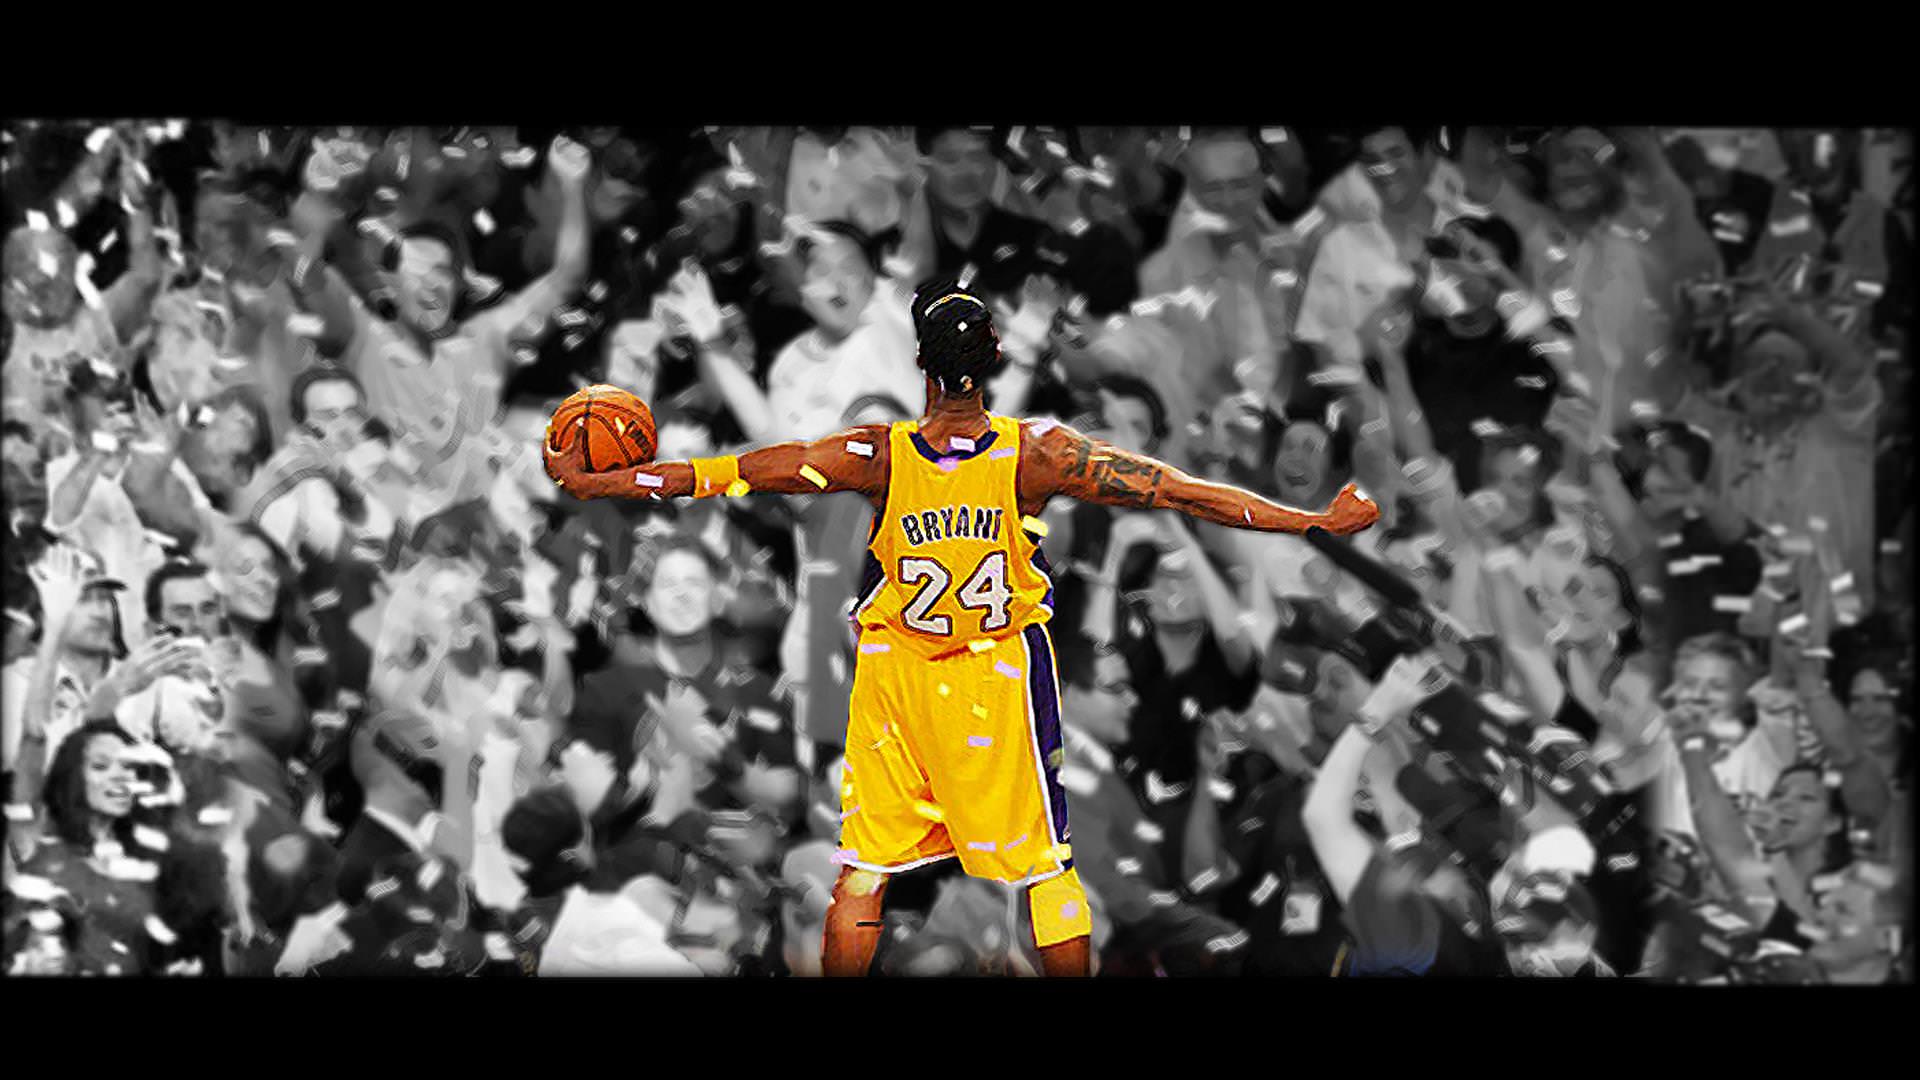 Kobe Bryant wallpaper with a crowd of fans in the background. - Kobe Bryant